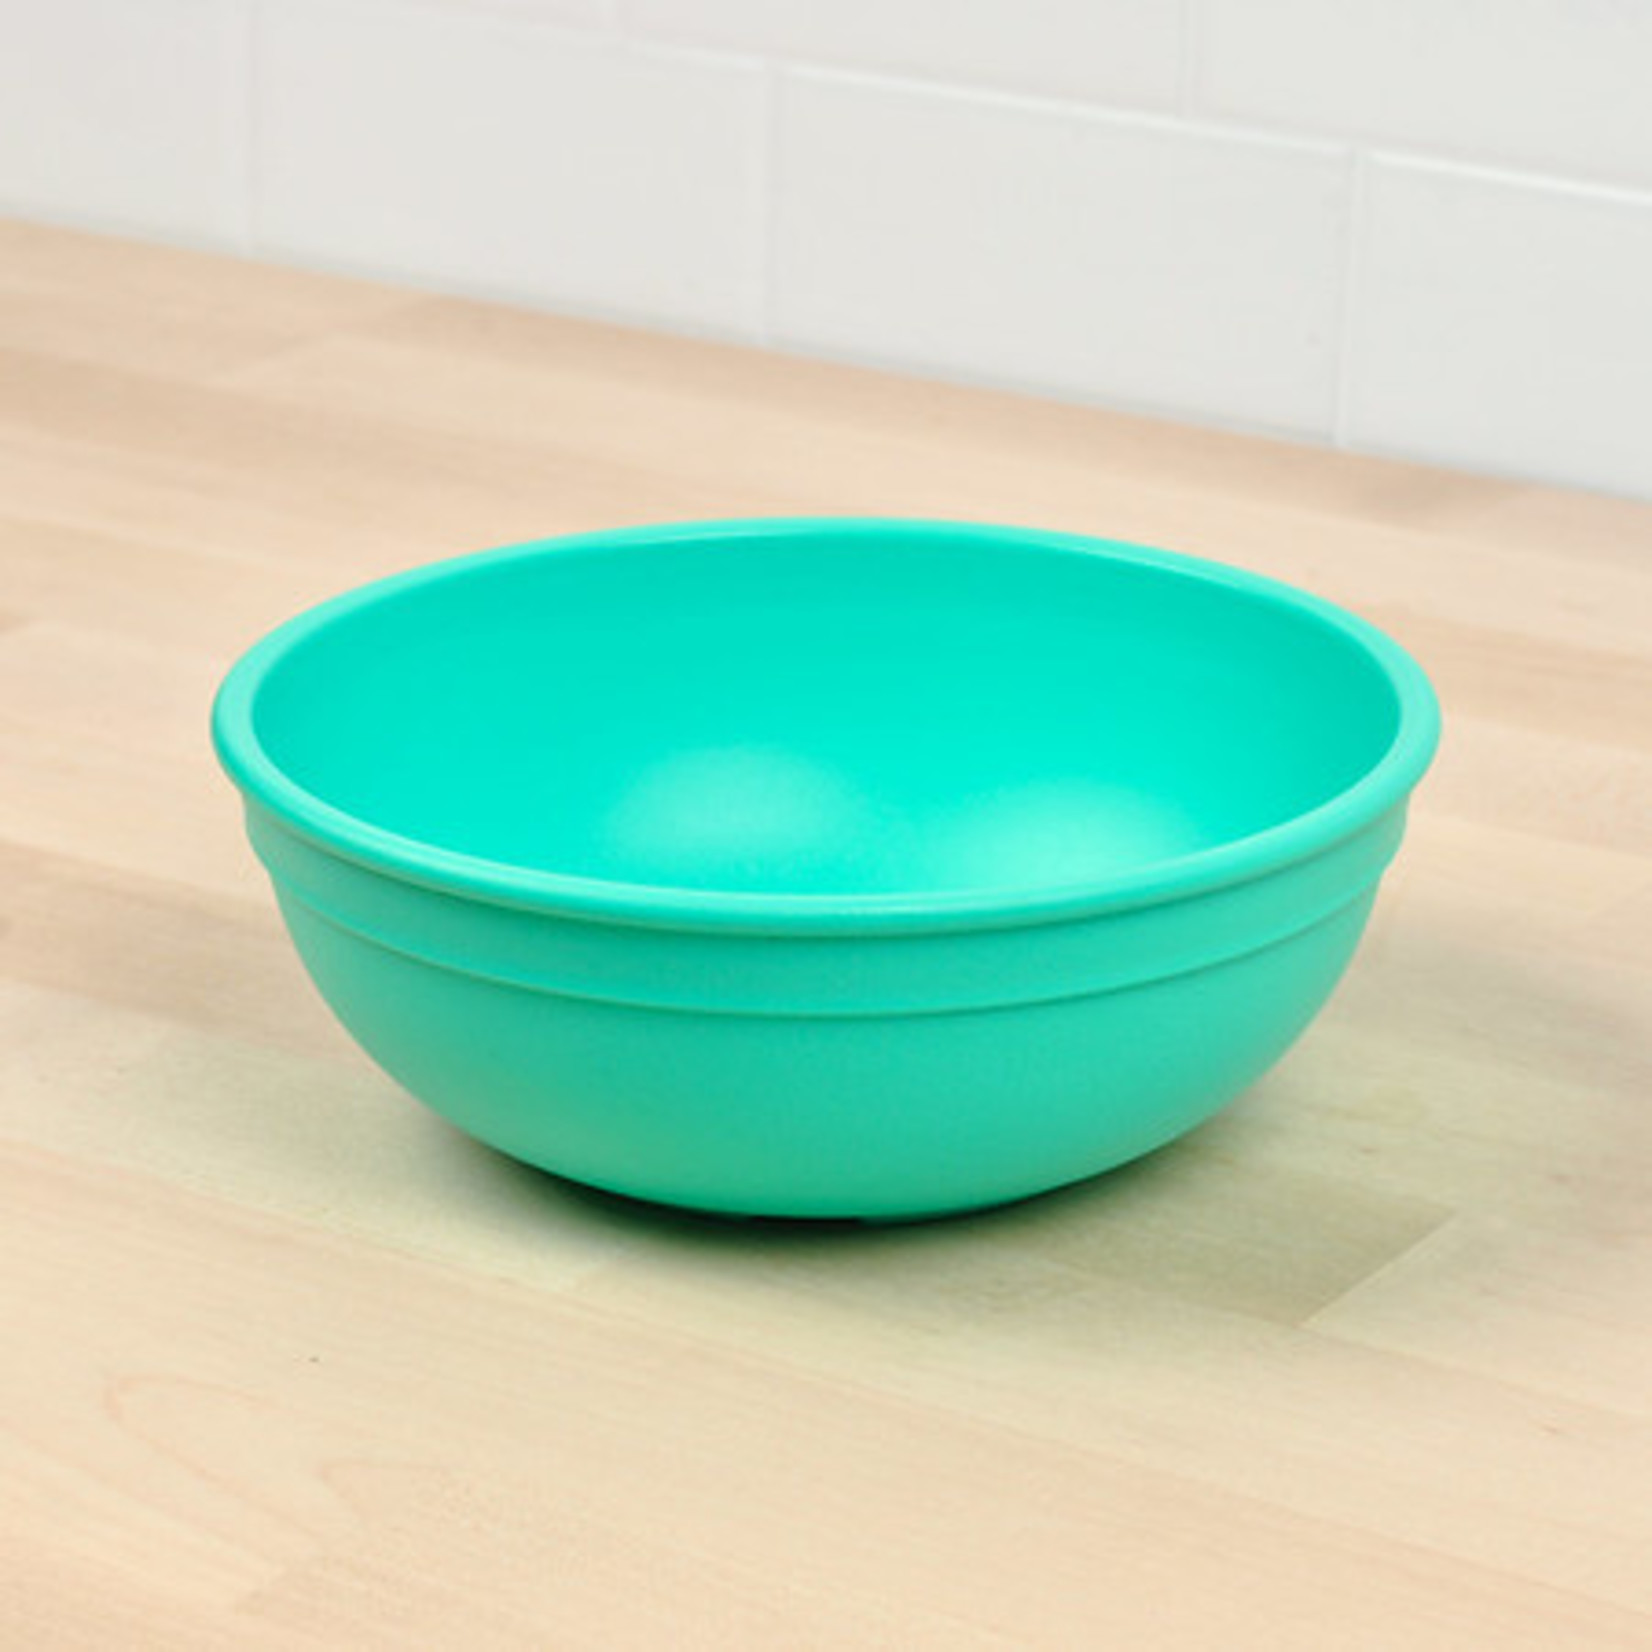 Replay Replay Large Bowl - Multiple colours available